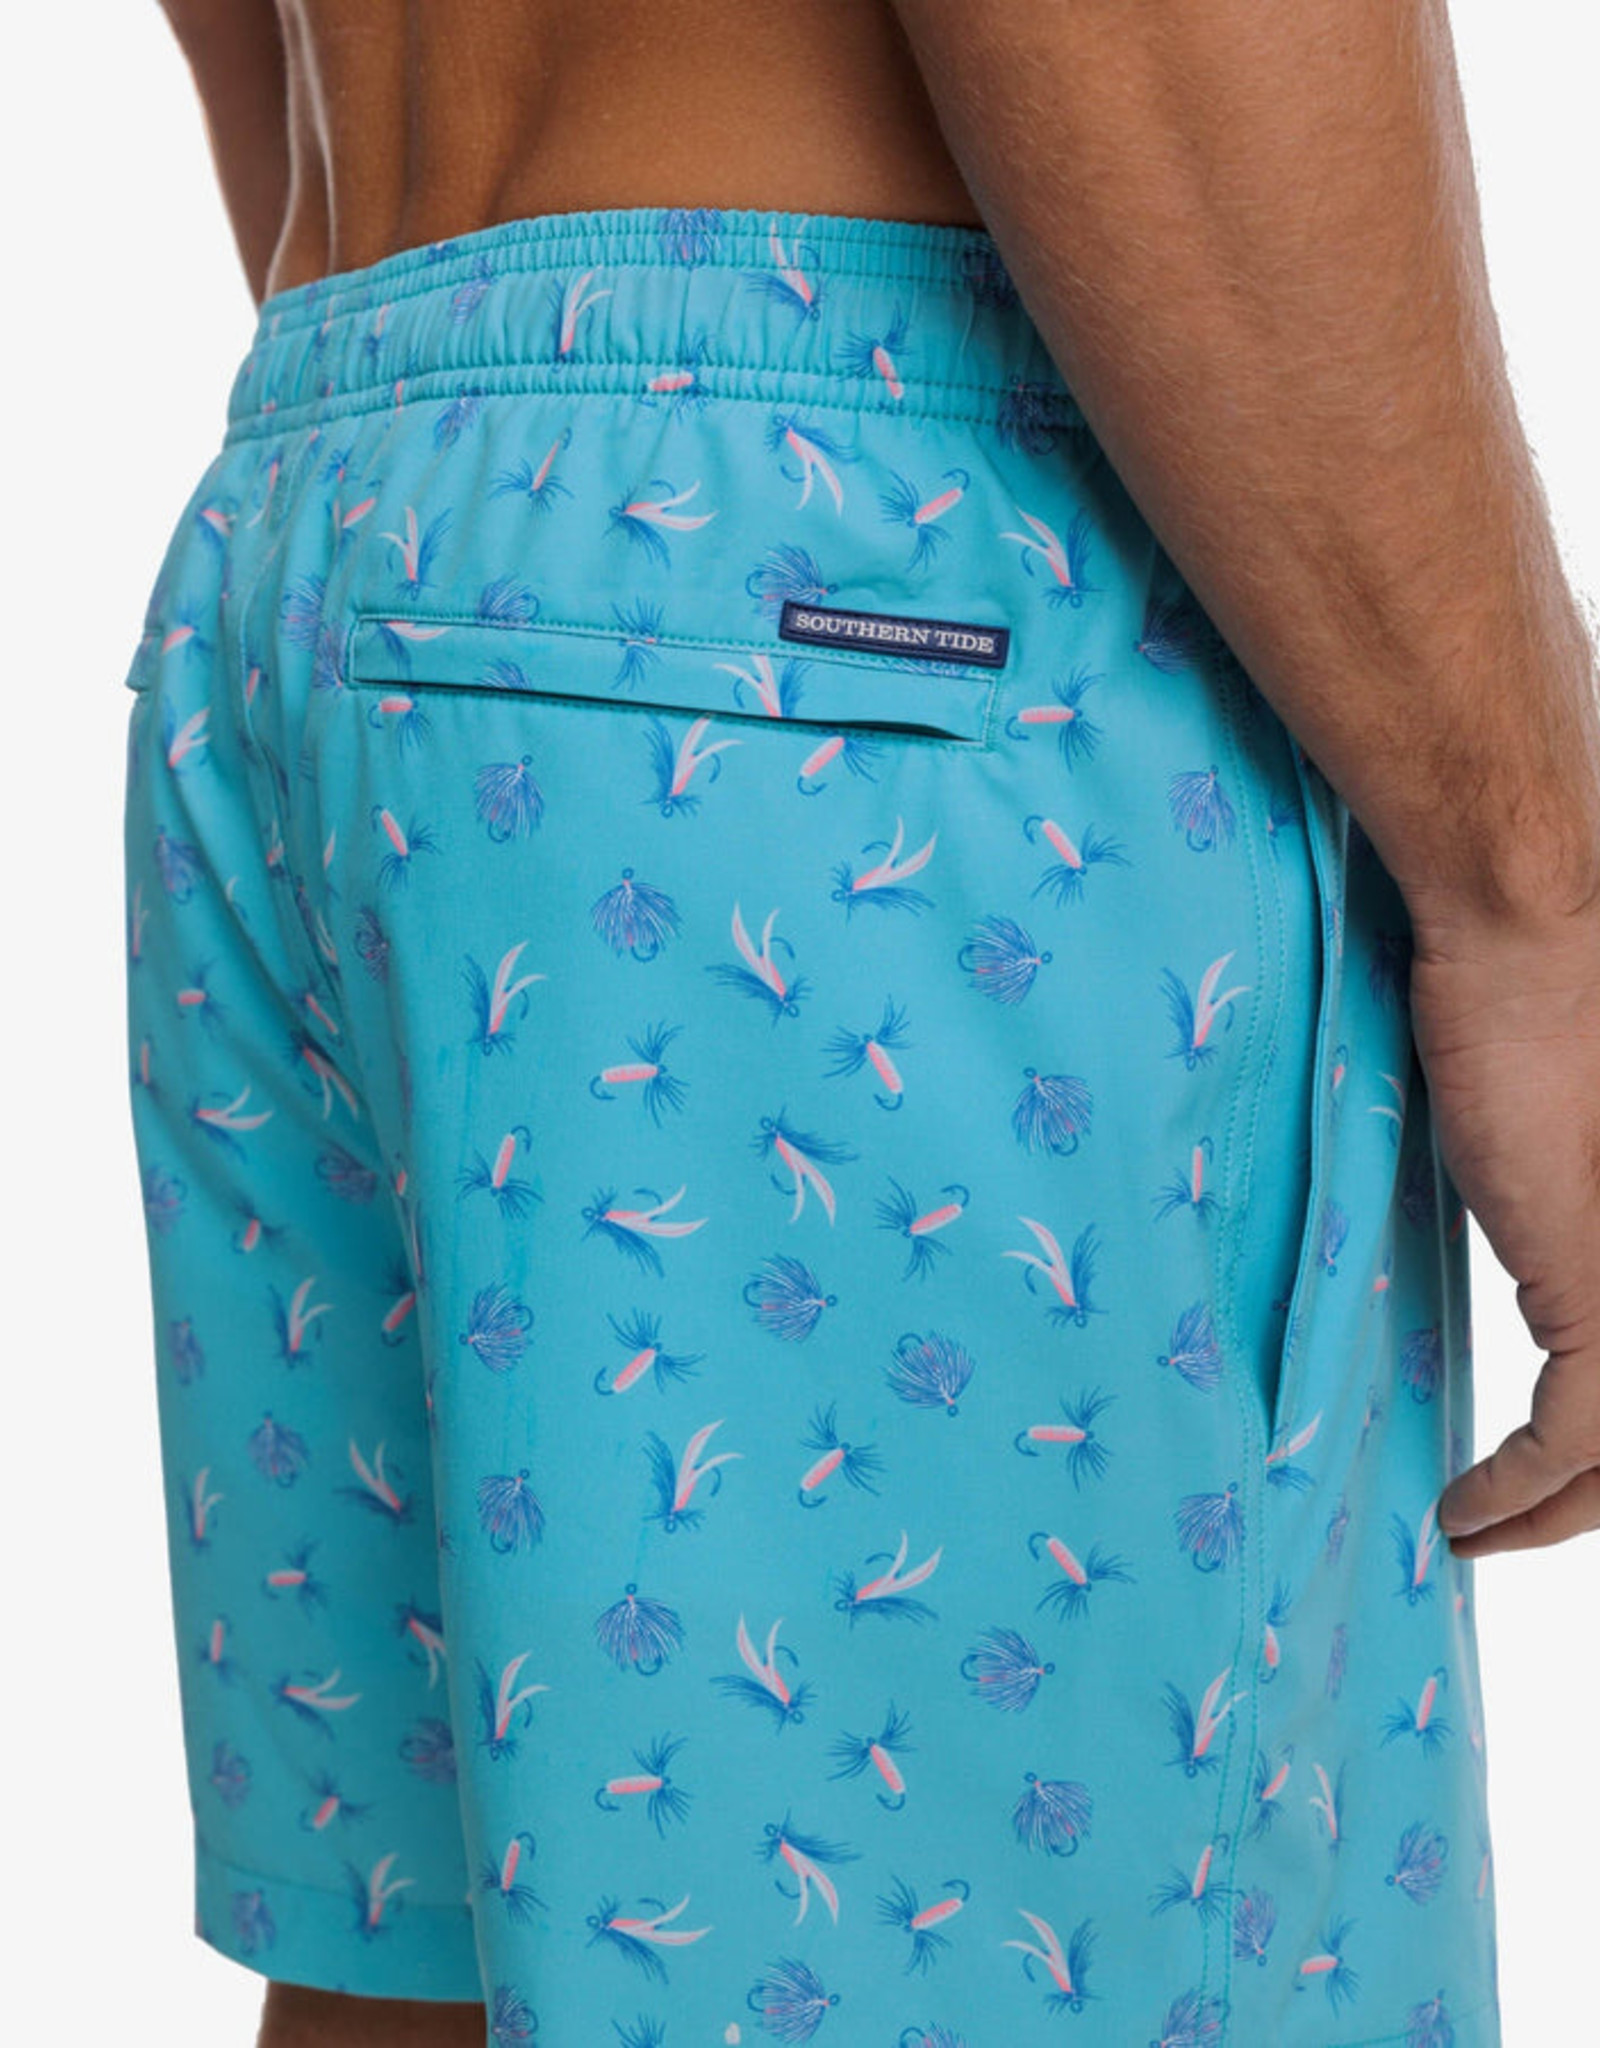 Southern Tide Guy with Allure Swim Trunk